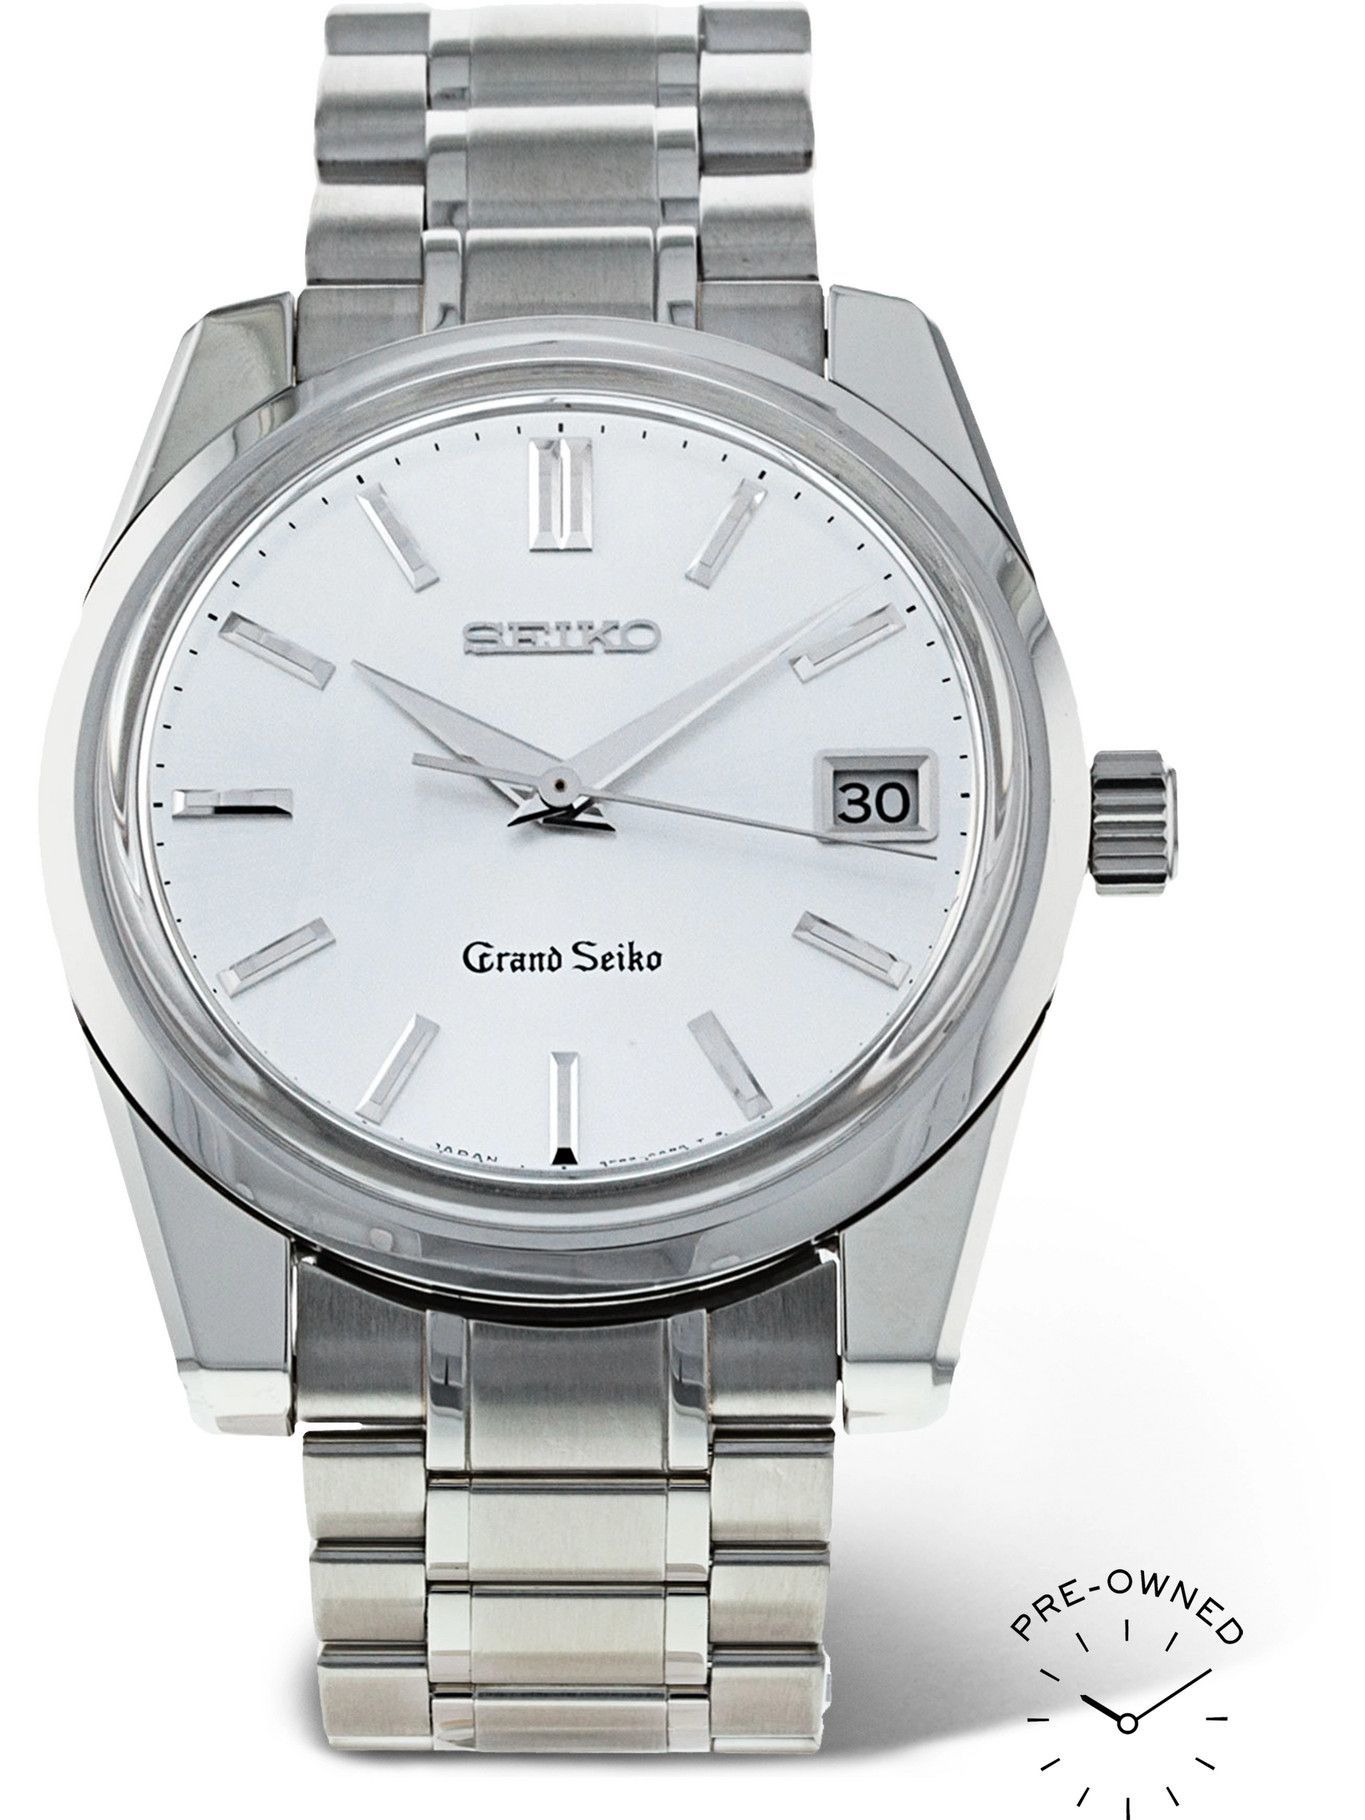 Grand Seiko - Pre-Owned 2016 Self-Dater Limited Edition 37mm Stainless  Steel Watch, Ref. No. SBGV009 Grand Seiko